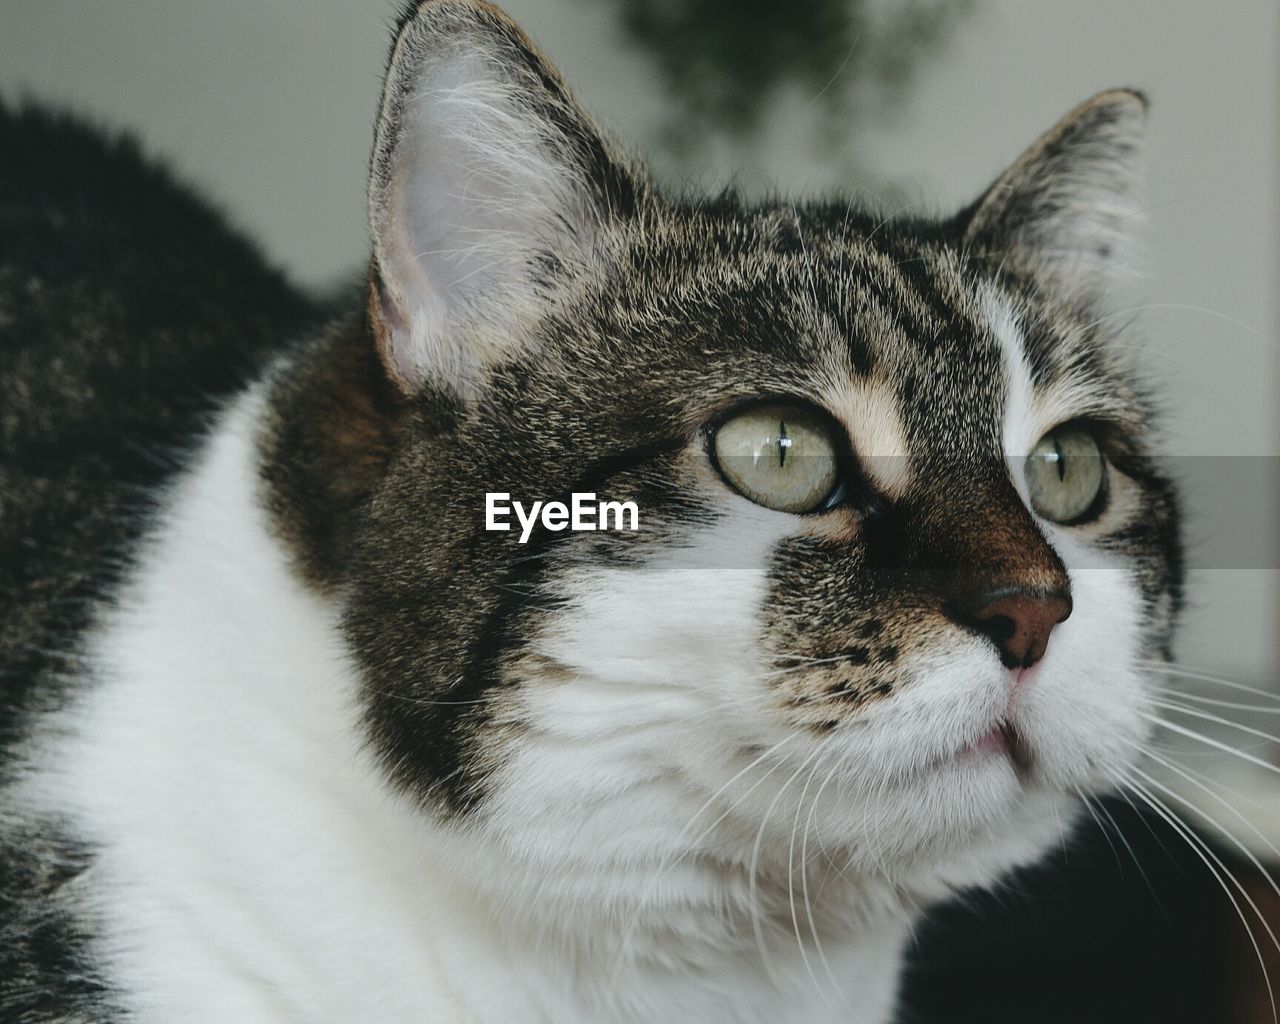 CLOSE-UP PORTRAIT OF CAT WITH EYES